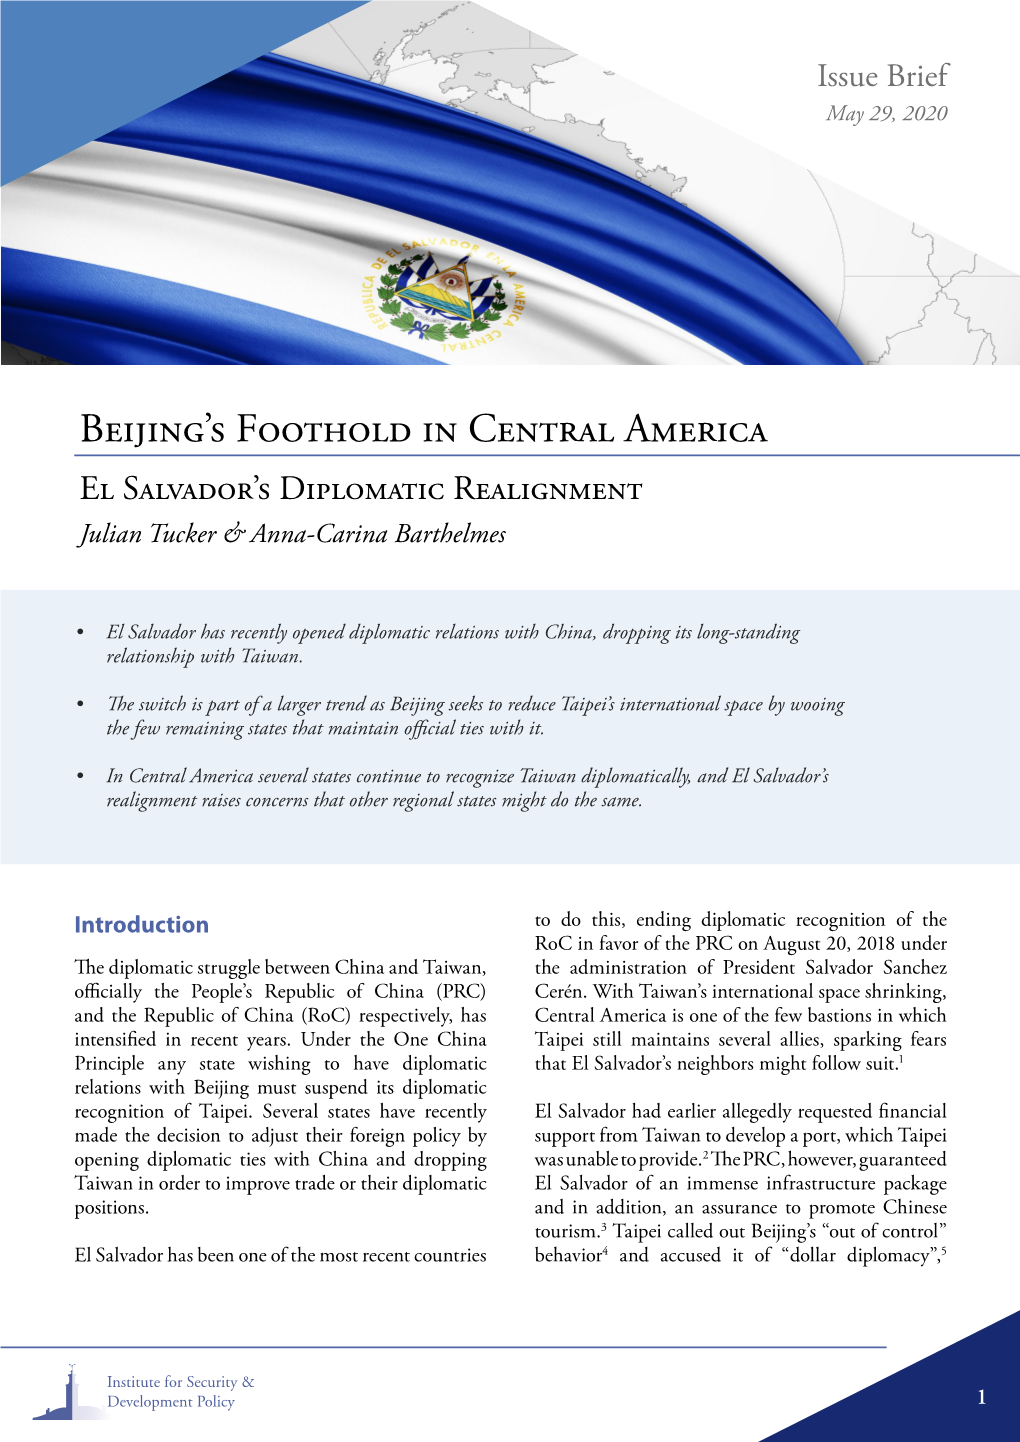 Beijing's Foothold in Central America